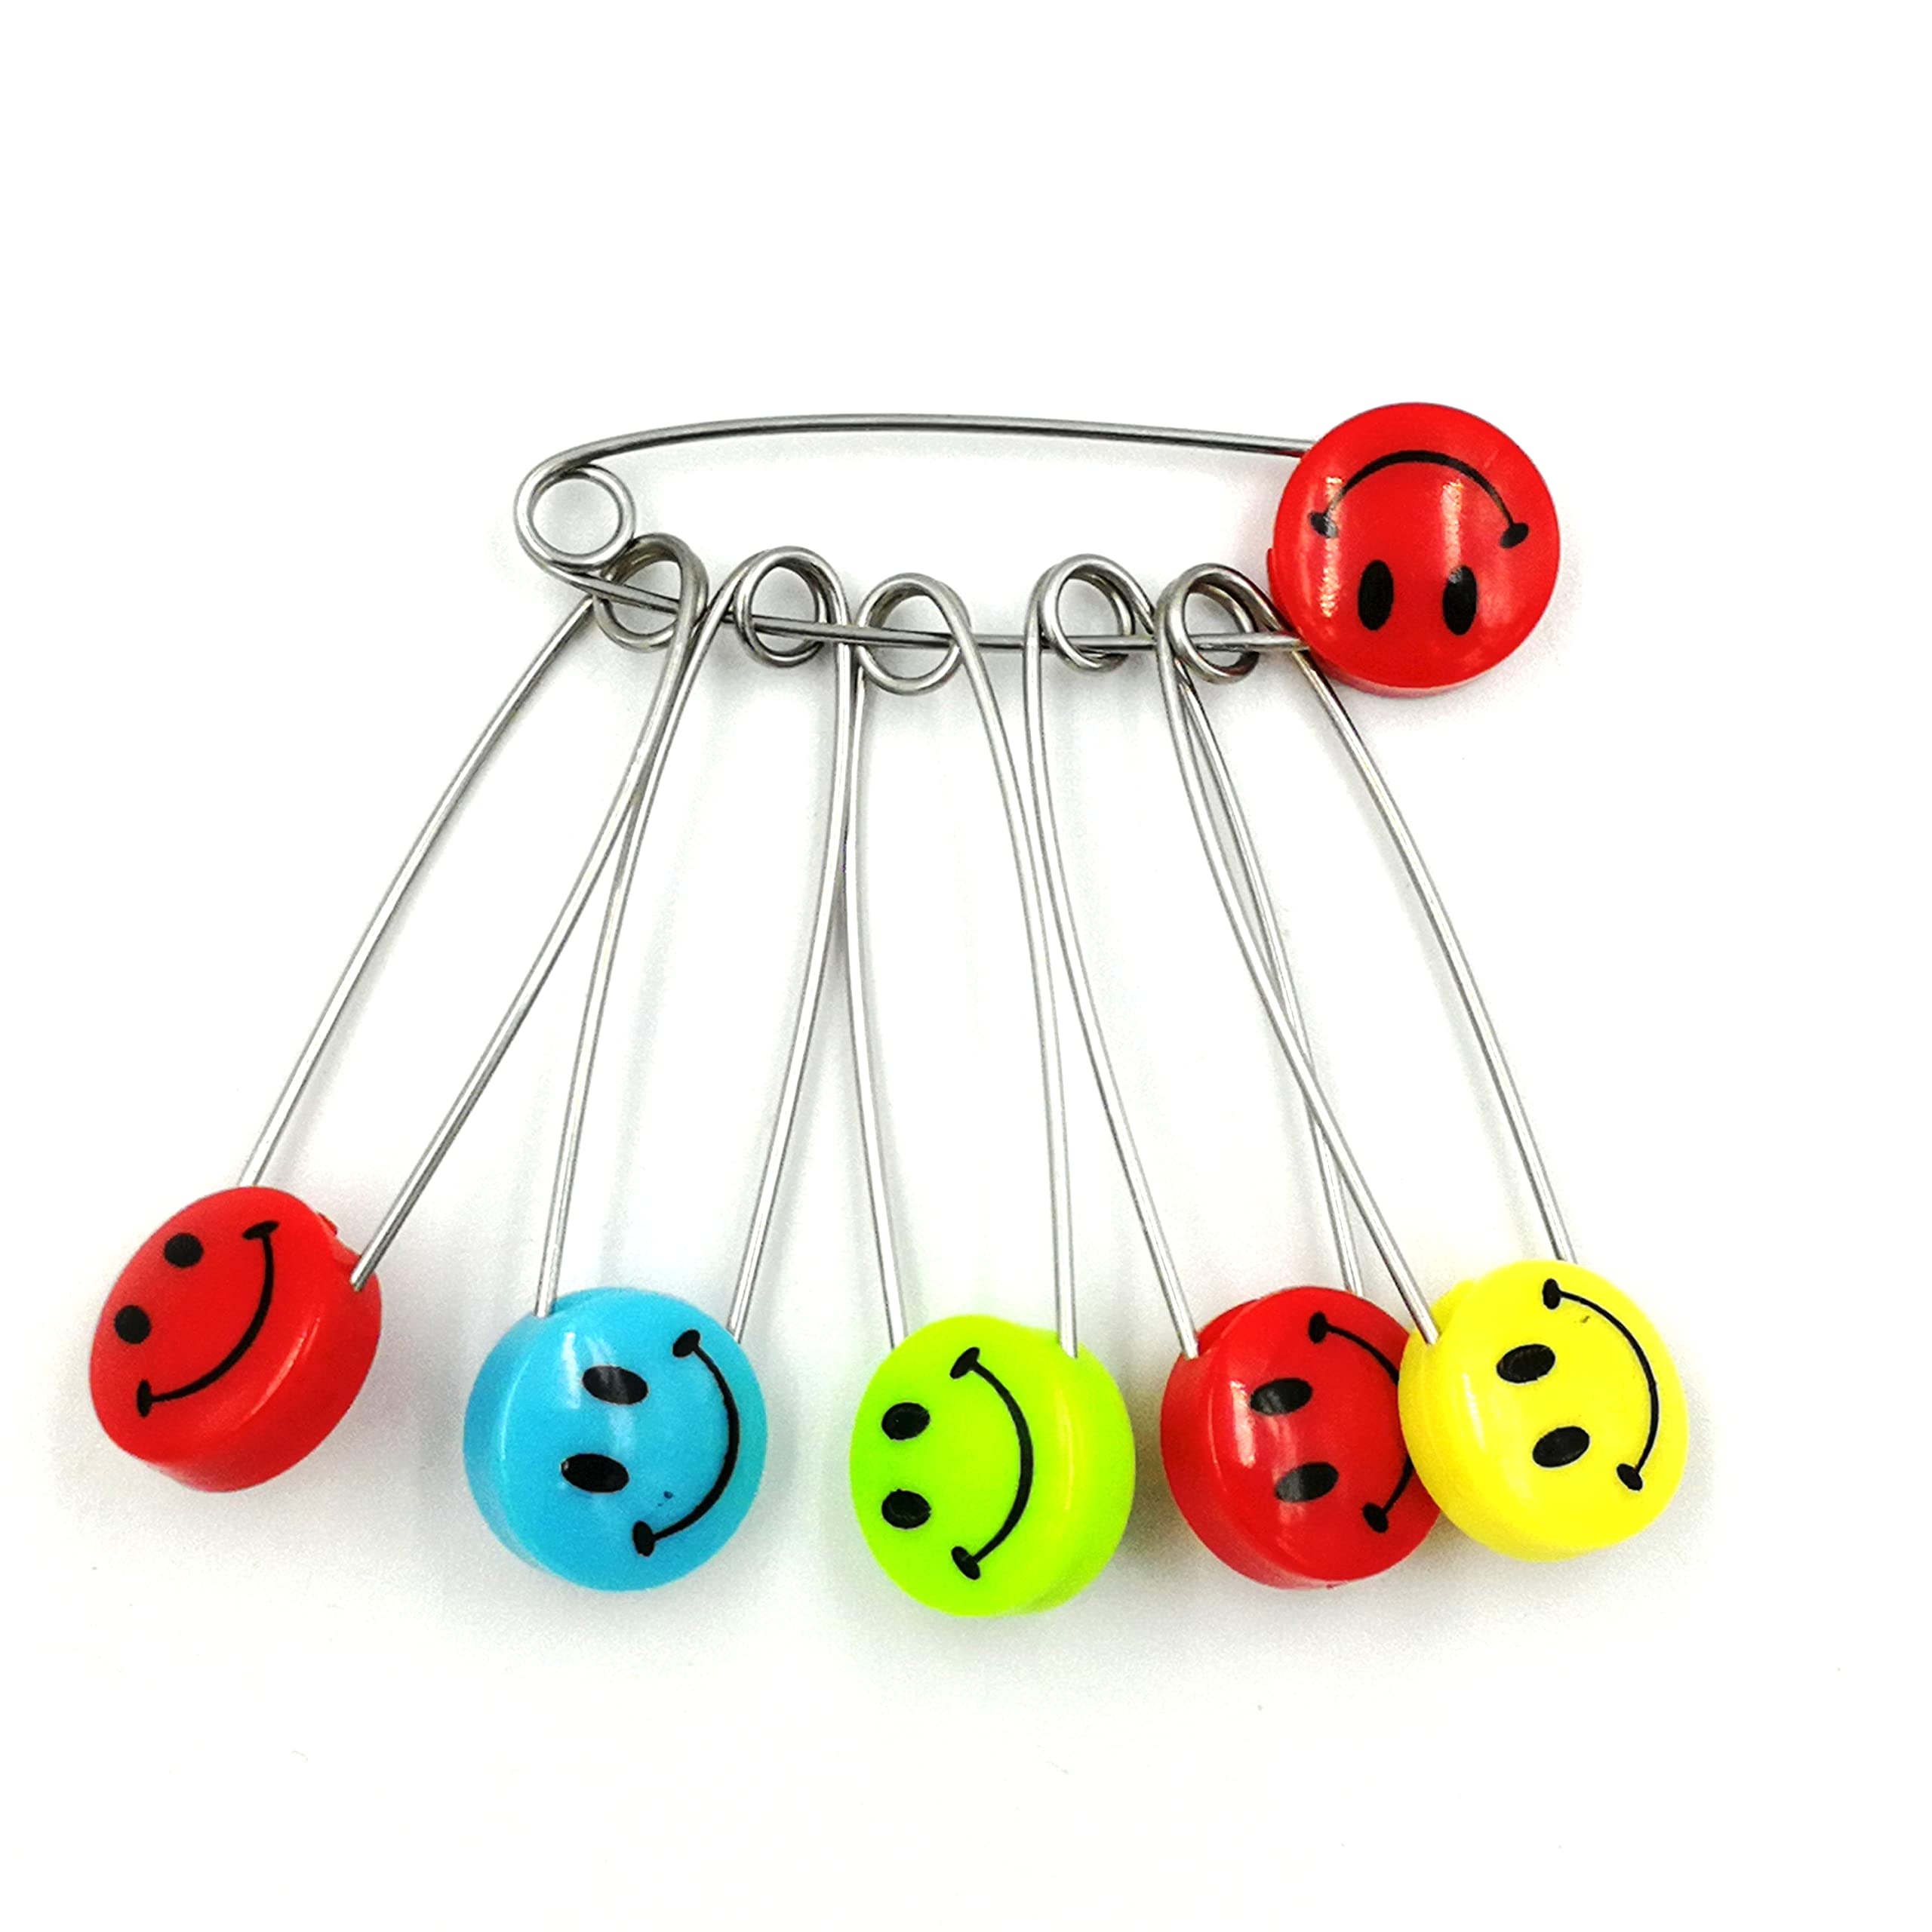 Diaper Pins, 50 Baby Safety Pins Cute Smile Face Stainless Steel Diaper  Pins for Cloth Dress Bag Socks Gloves Decorative Holder with Safe Locking  Closures Cute Brooch for Crafts